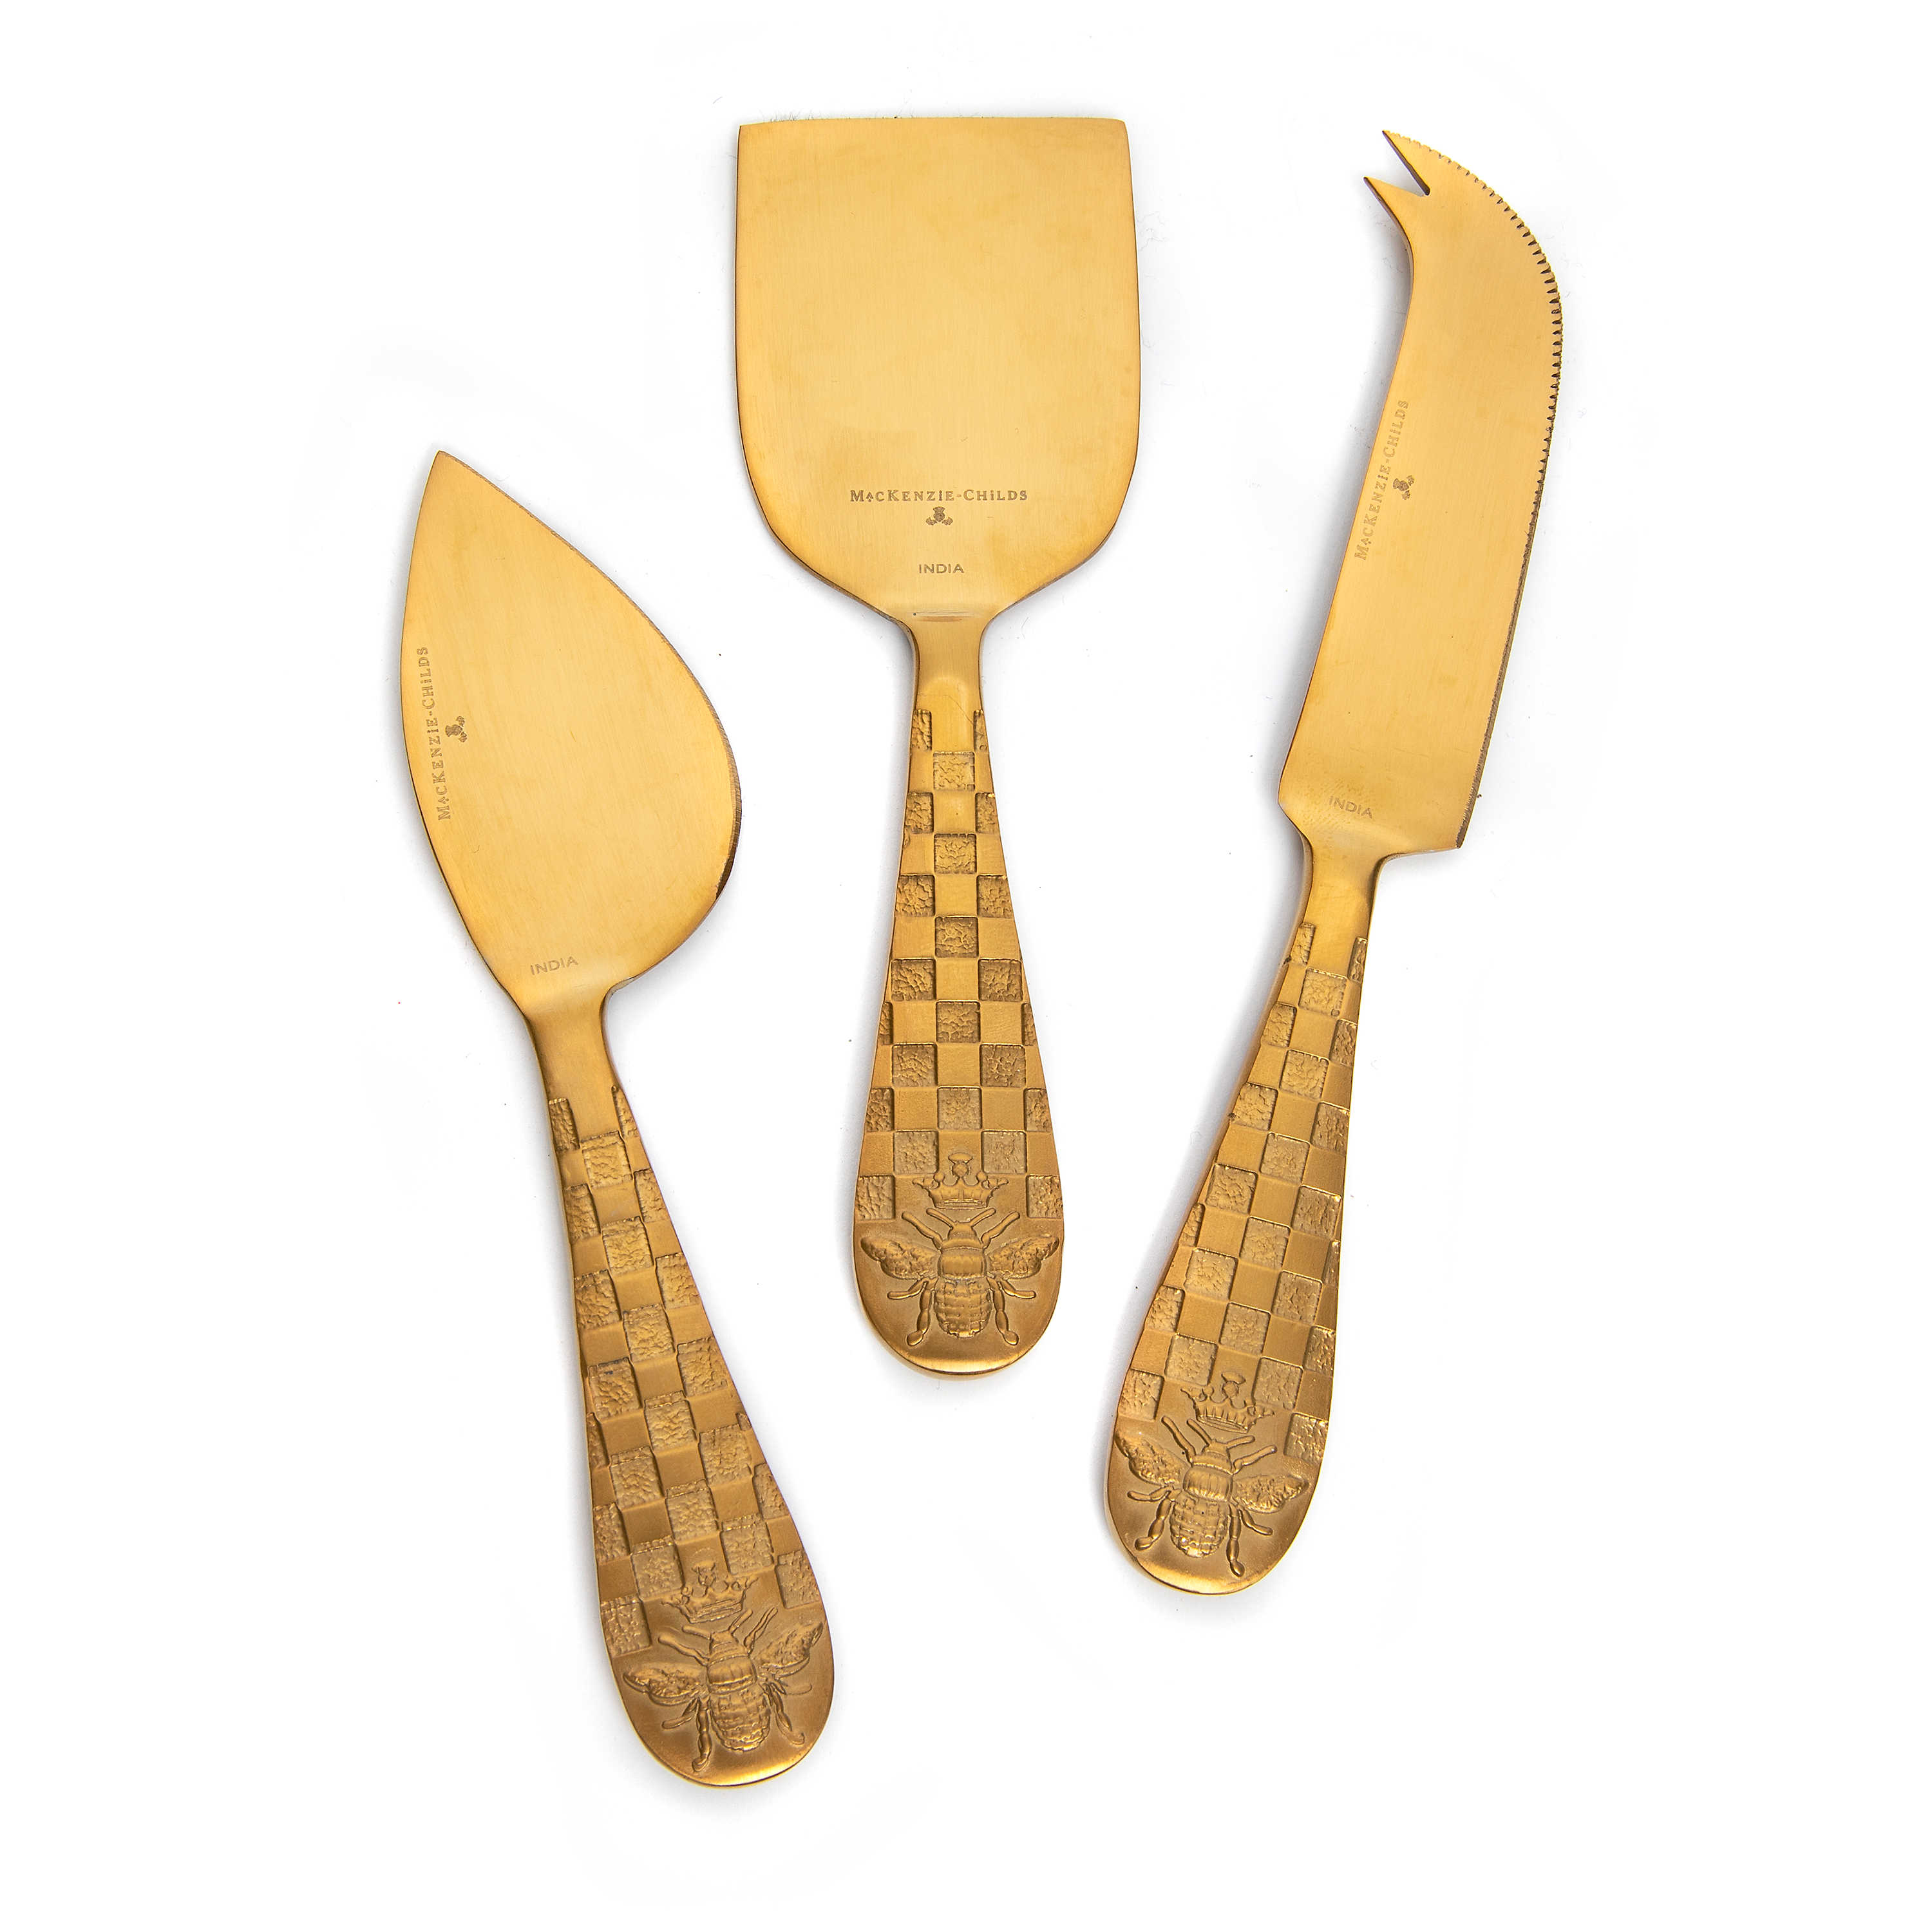 Queen Bee Cheese Knives, Set of 3 mackenzie-childs Panama 0